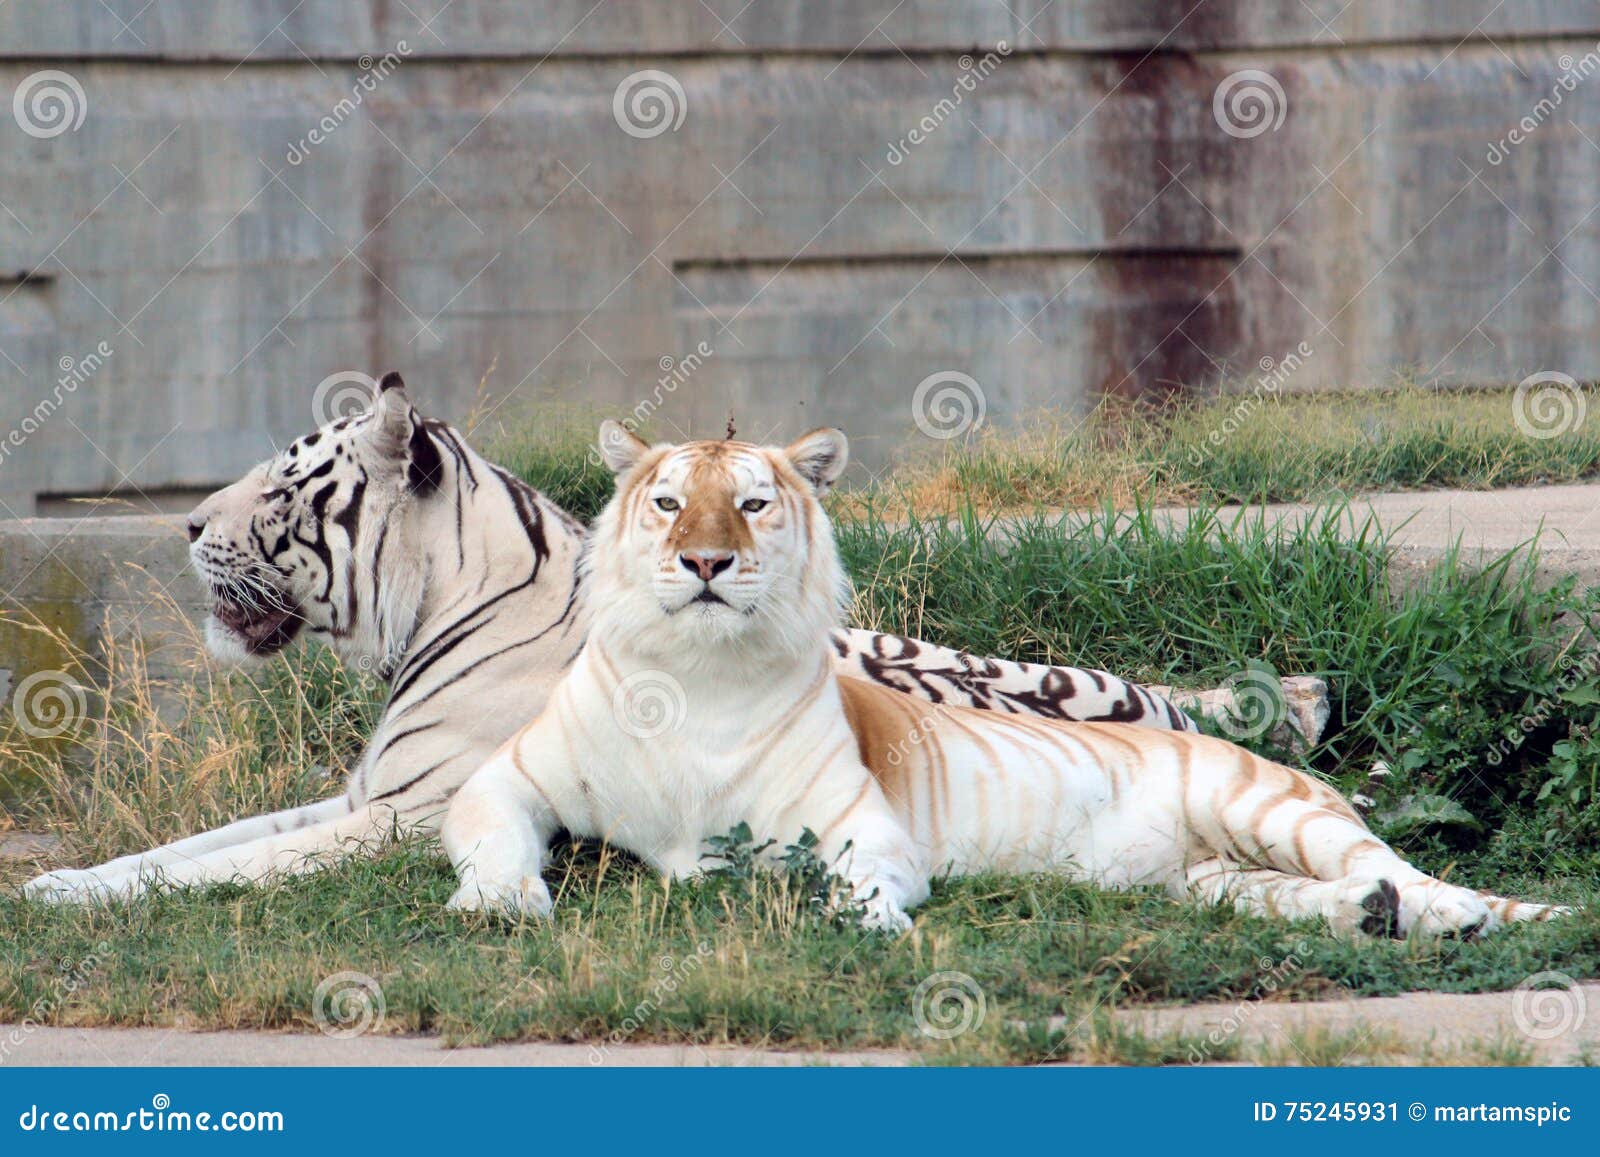 couple of bengal tigers